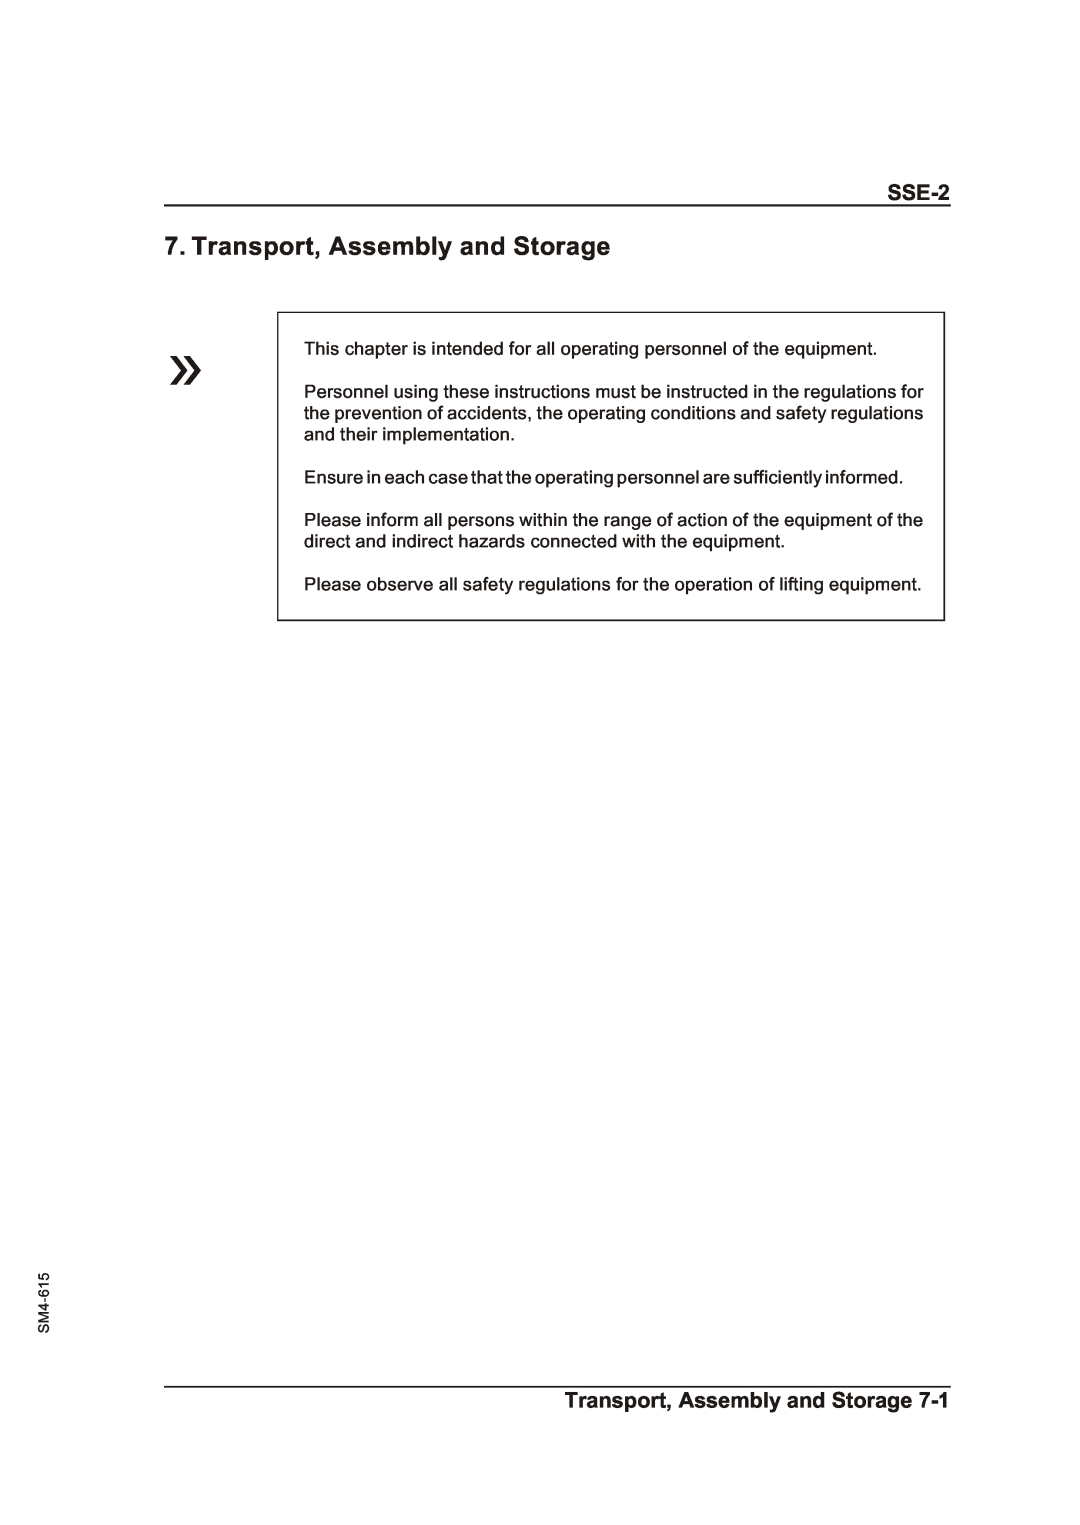 Sterling SSE-2 operating instructions Transport, Assembly and Storage 